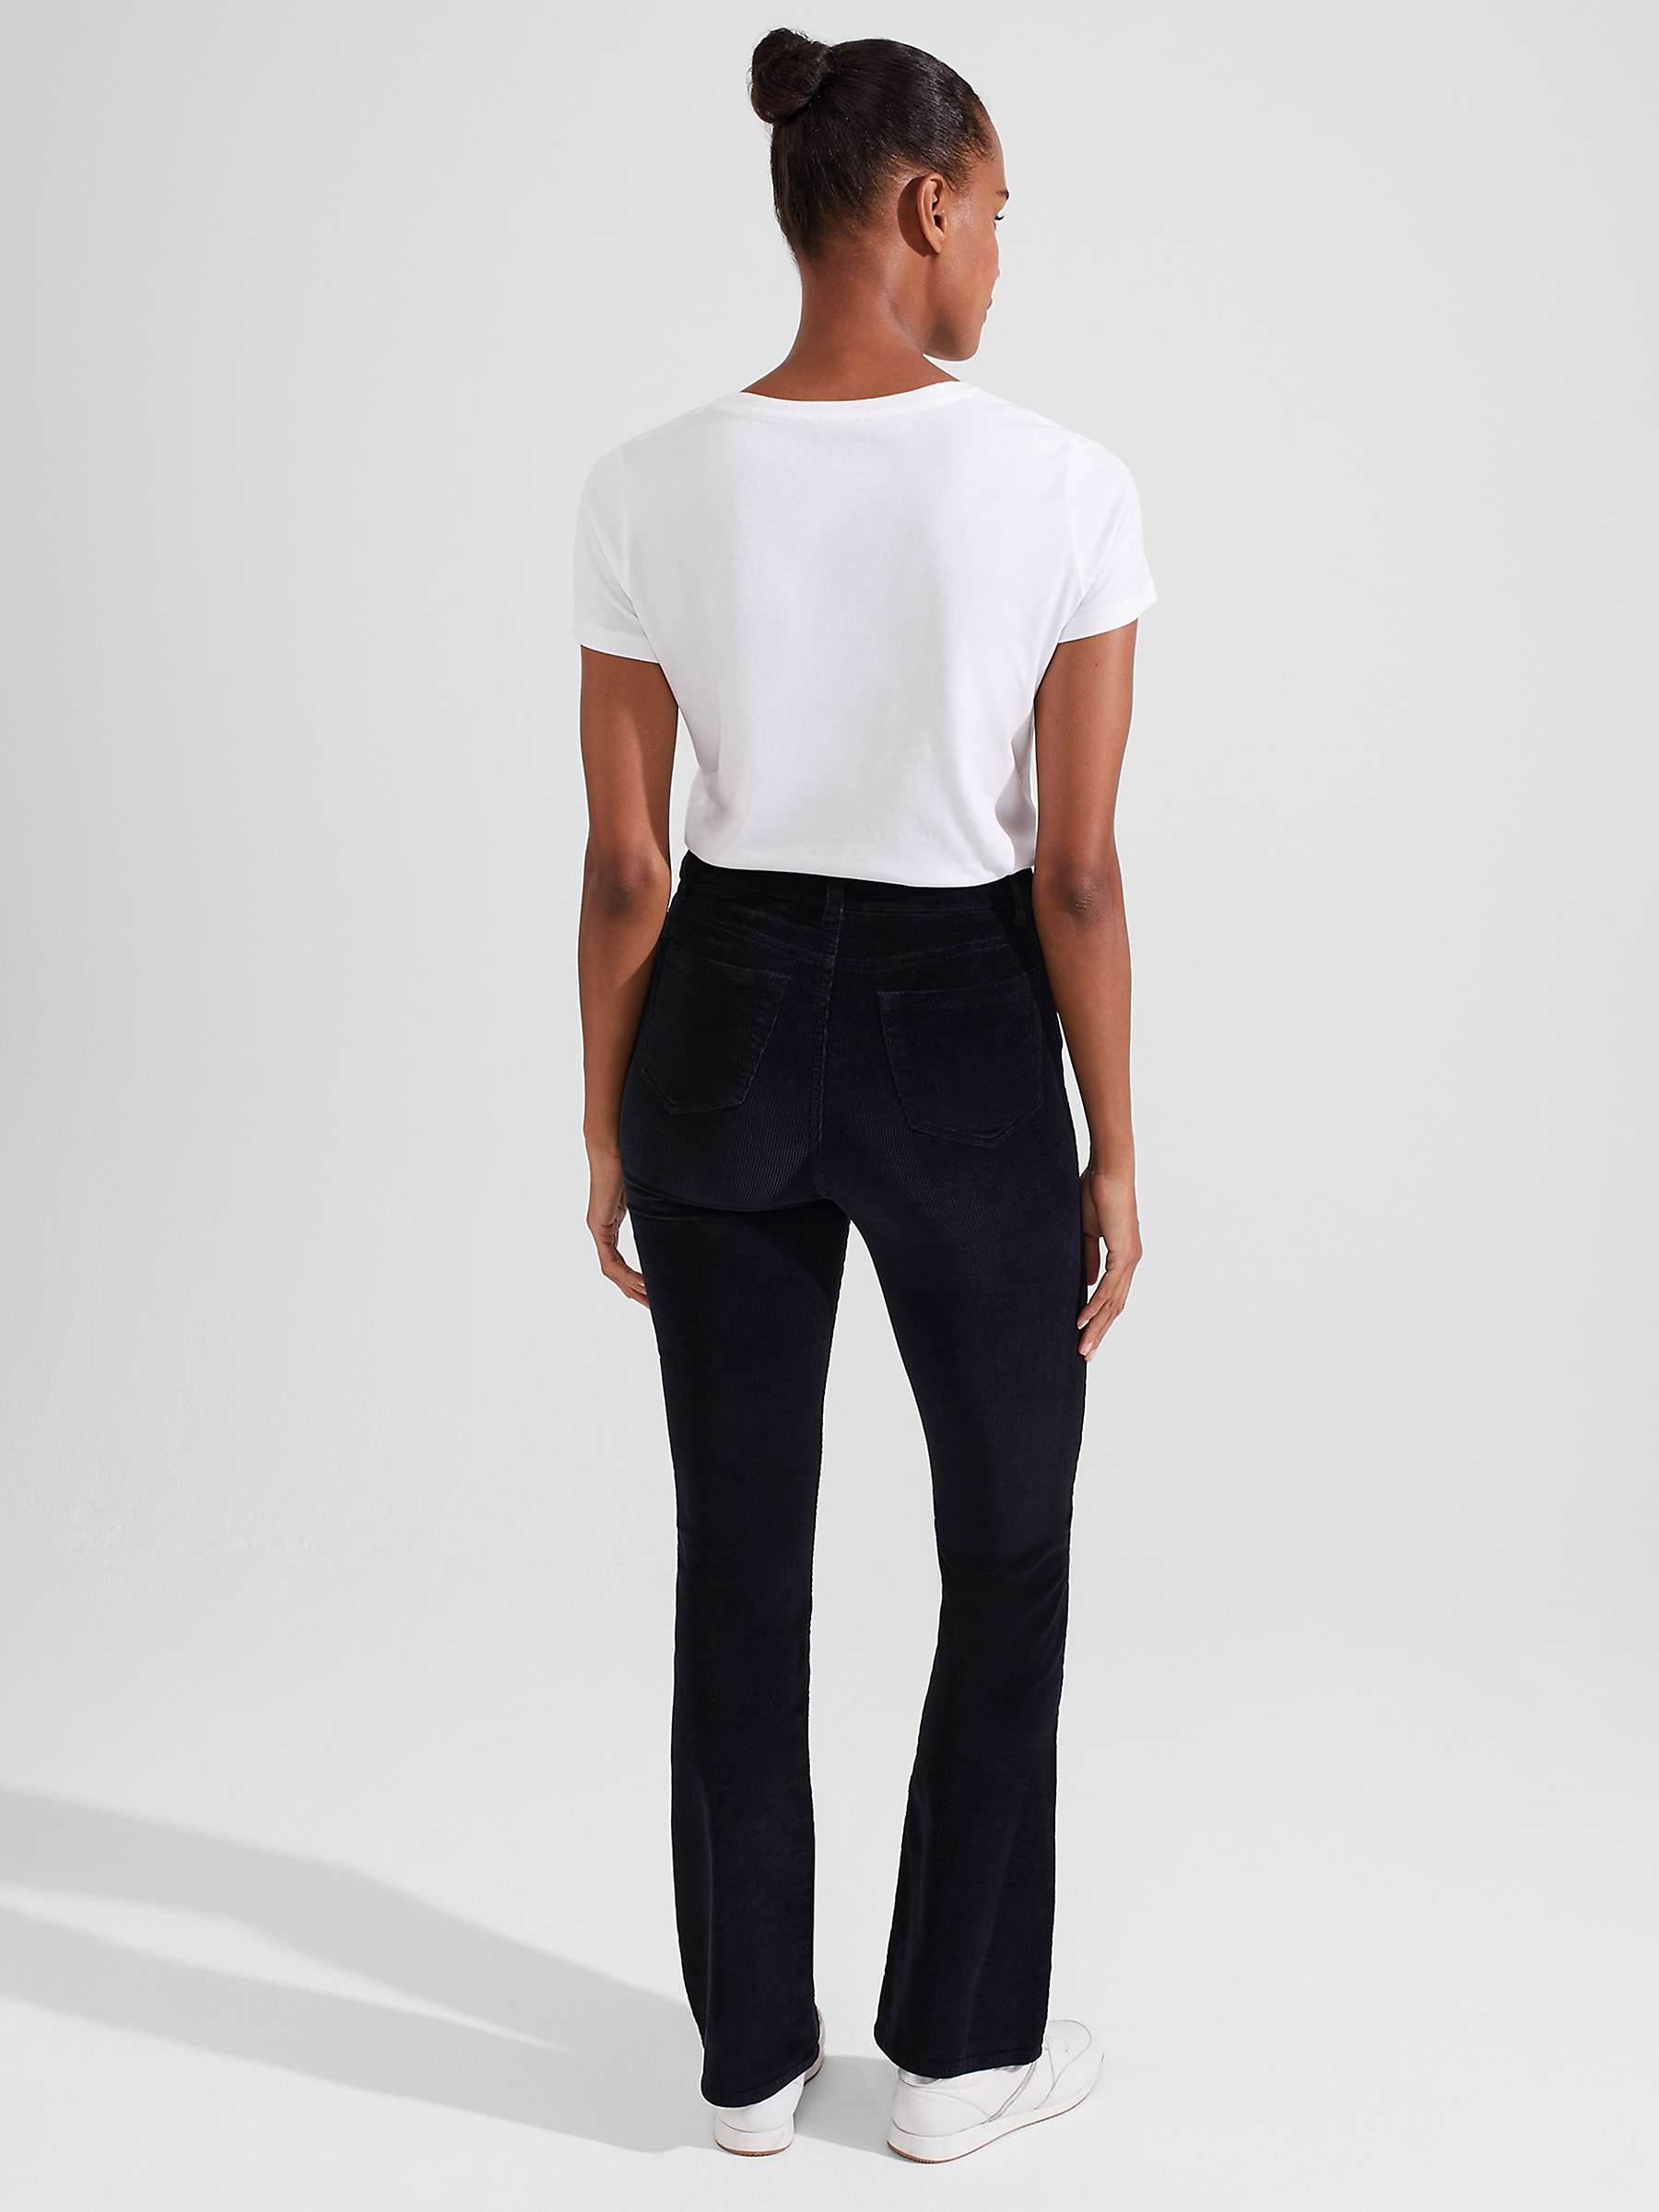 Buy Hobbs Remy Cord Jeans, Navy Online at johnlewis.com